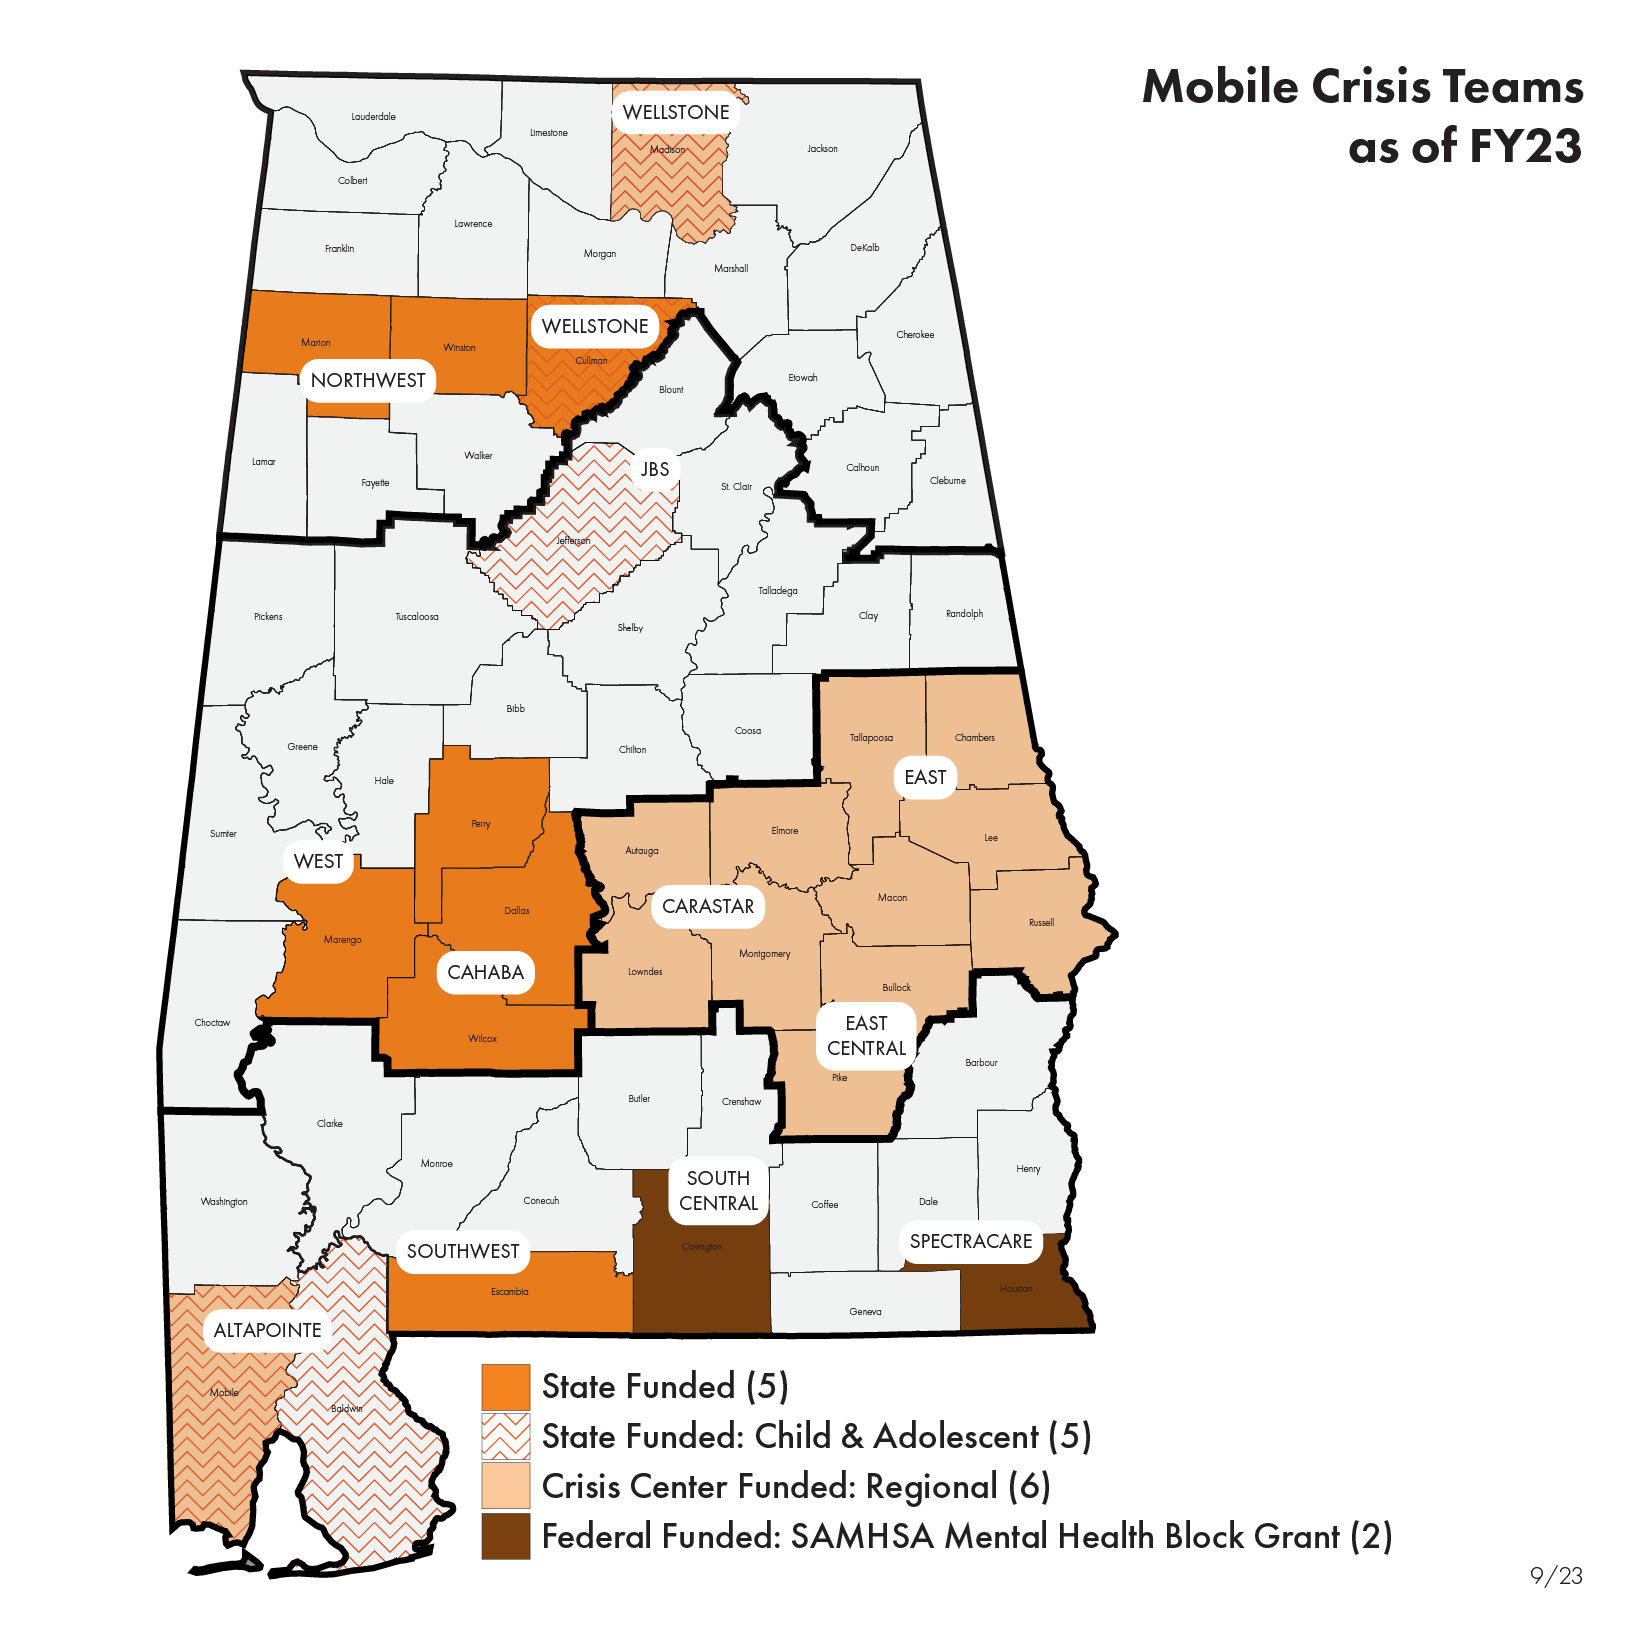 Map of Alabama showing mobile crisis services available in the following counties: Covington, Cullman, Dallas, Escambia, Houston, Marengo, Marion, Perry, Wilcox, and Winston.